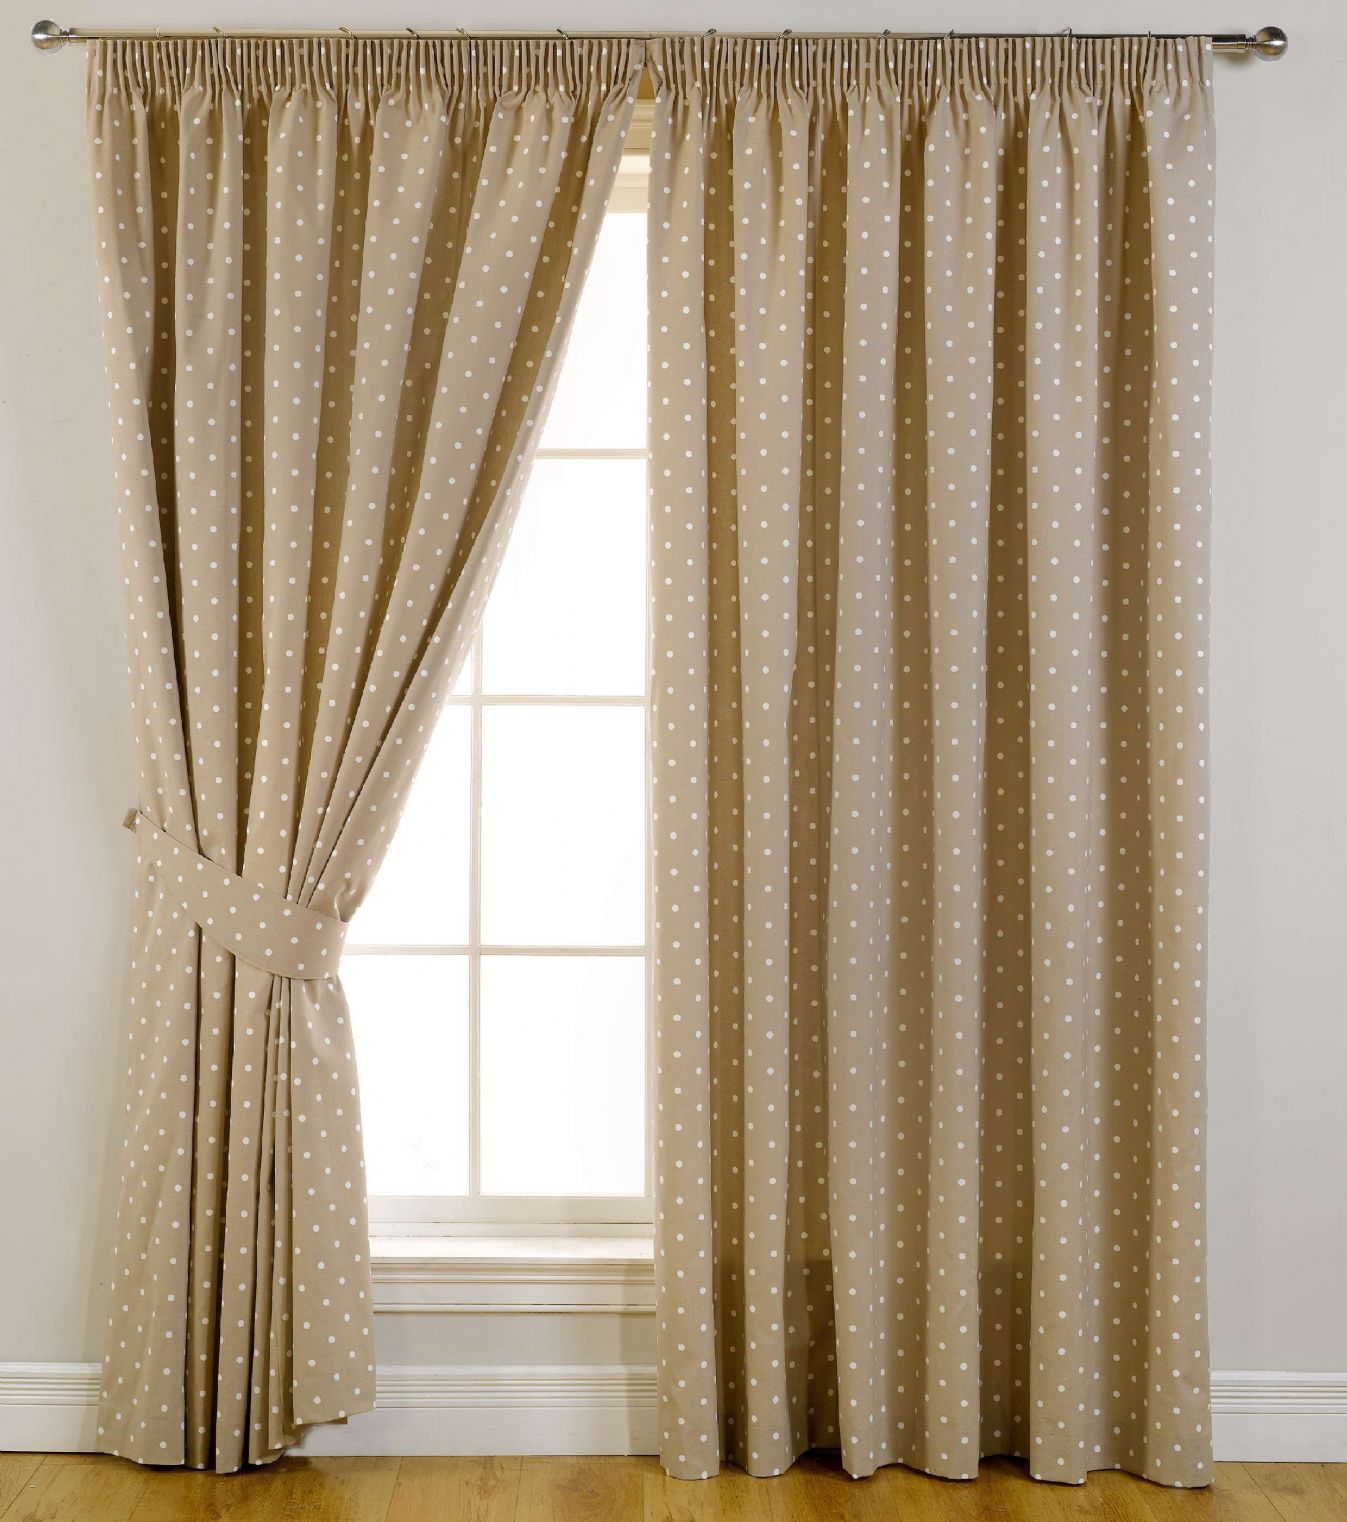 Dot curtains in the bedroom